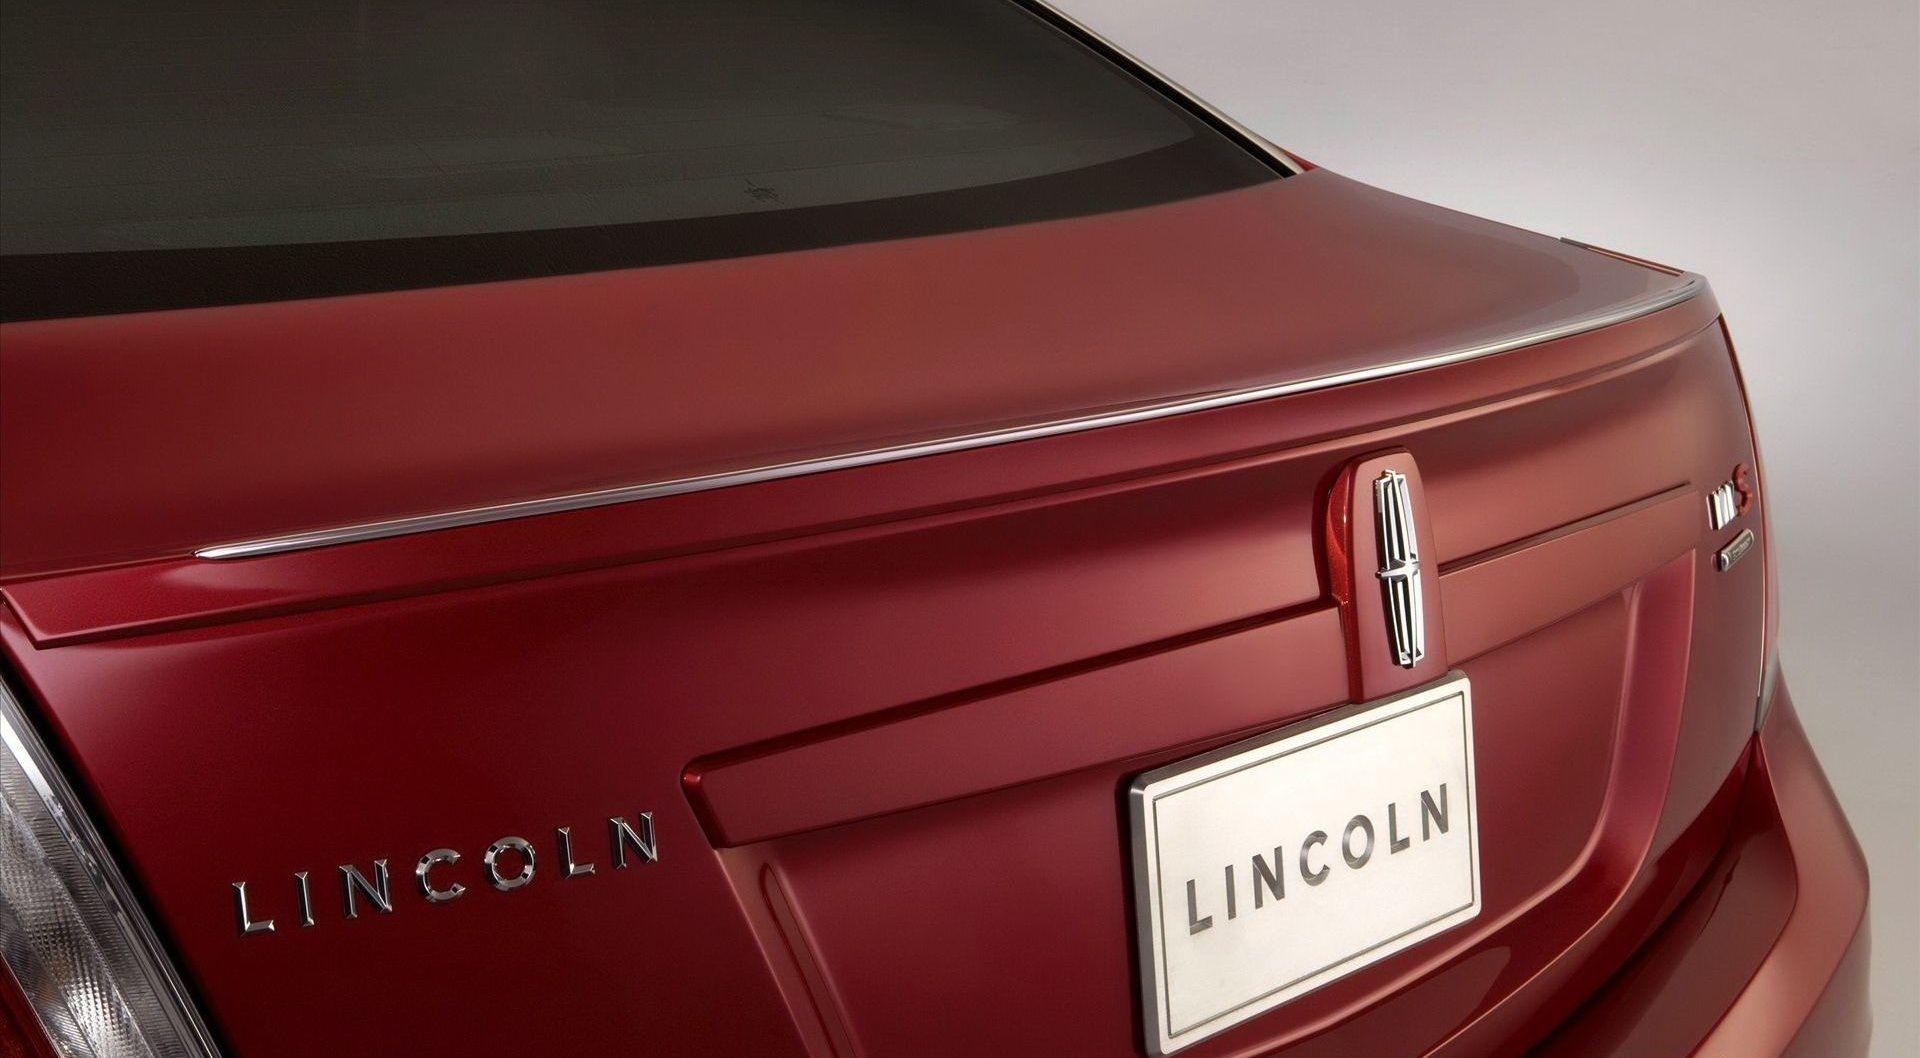 Red Lincoln Logo - Lincoln Logo, Lincoln Car Symbol Meaning and History | Car Brand ...